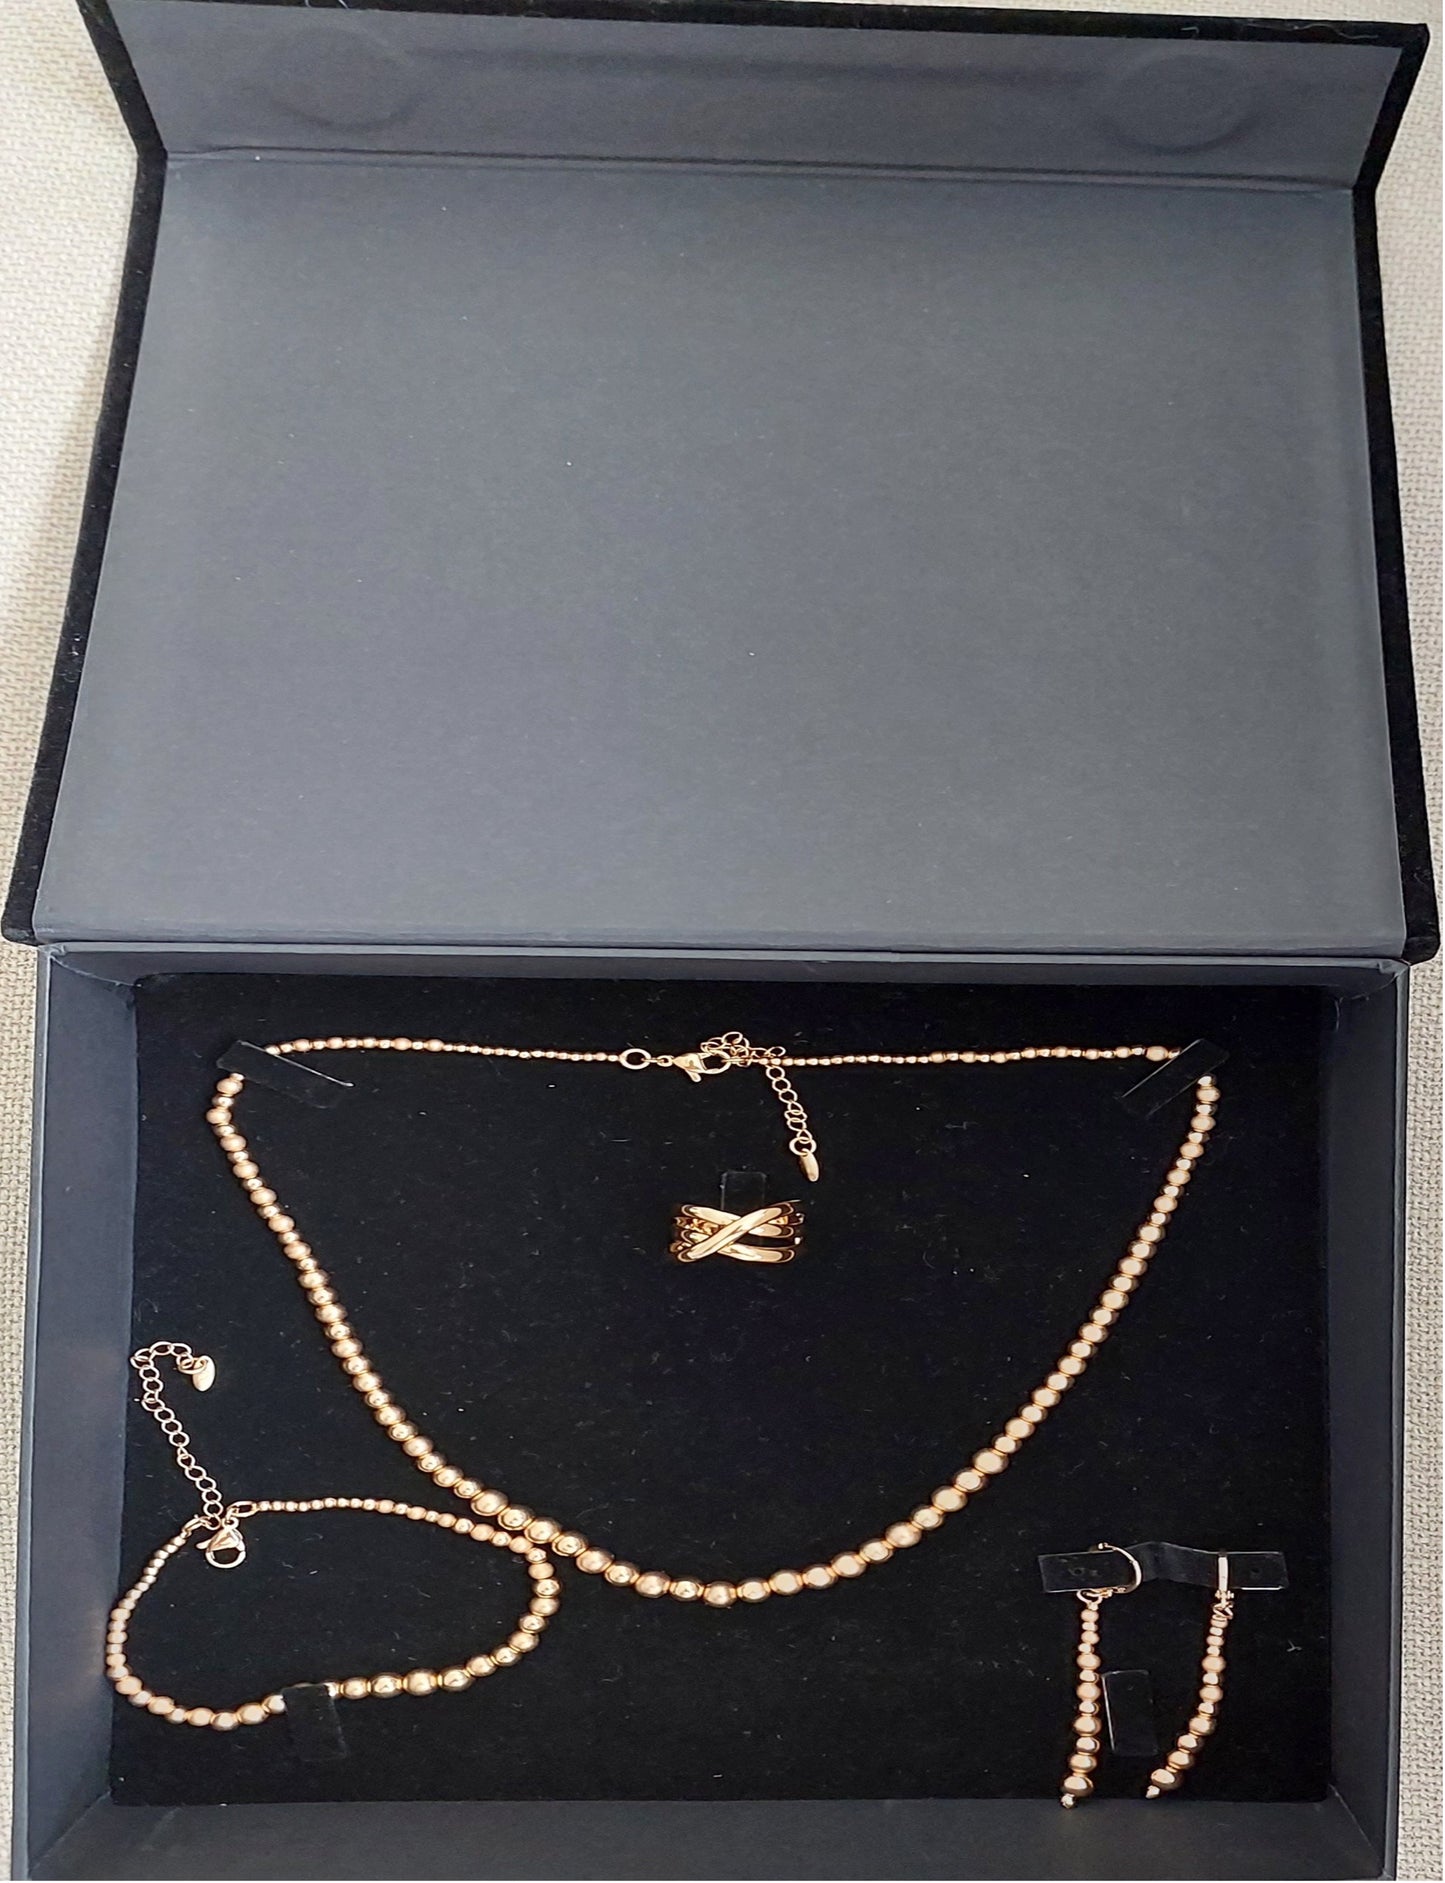 Great Gift Jewelry Set 4 pieces Necklace Earrings Ring Bracelet Gold Plated Small Balls design in Gift Box